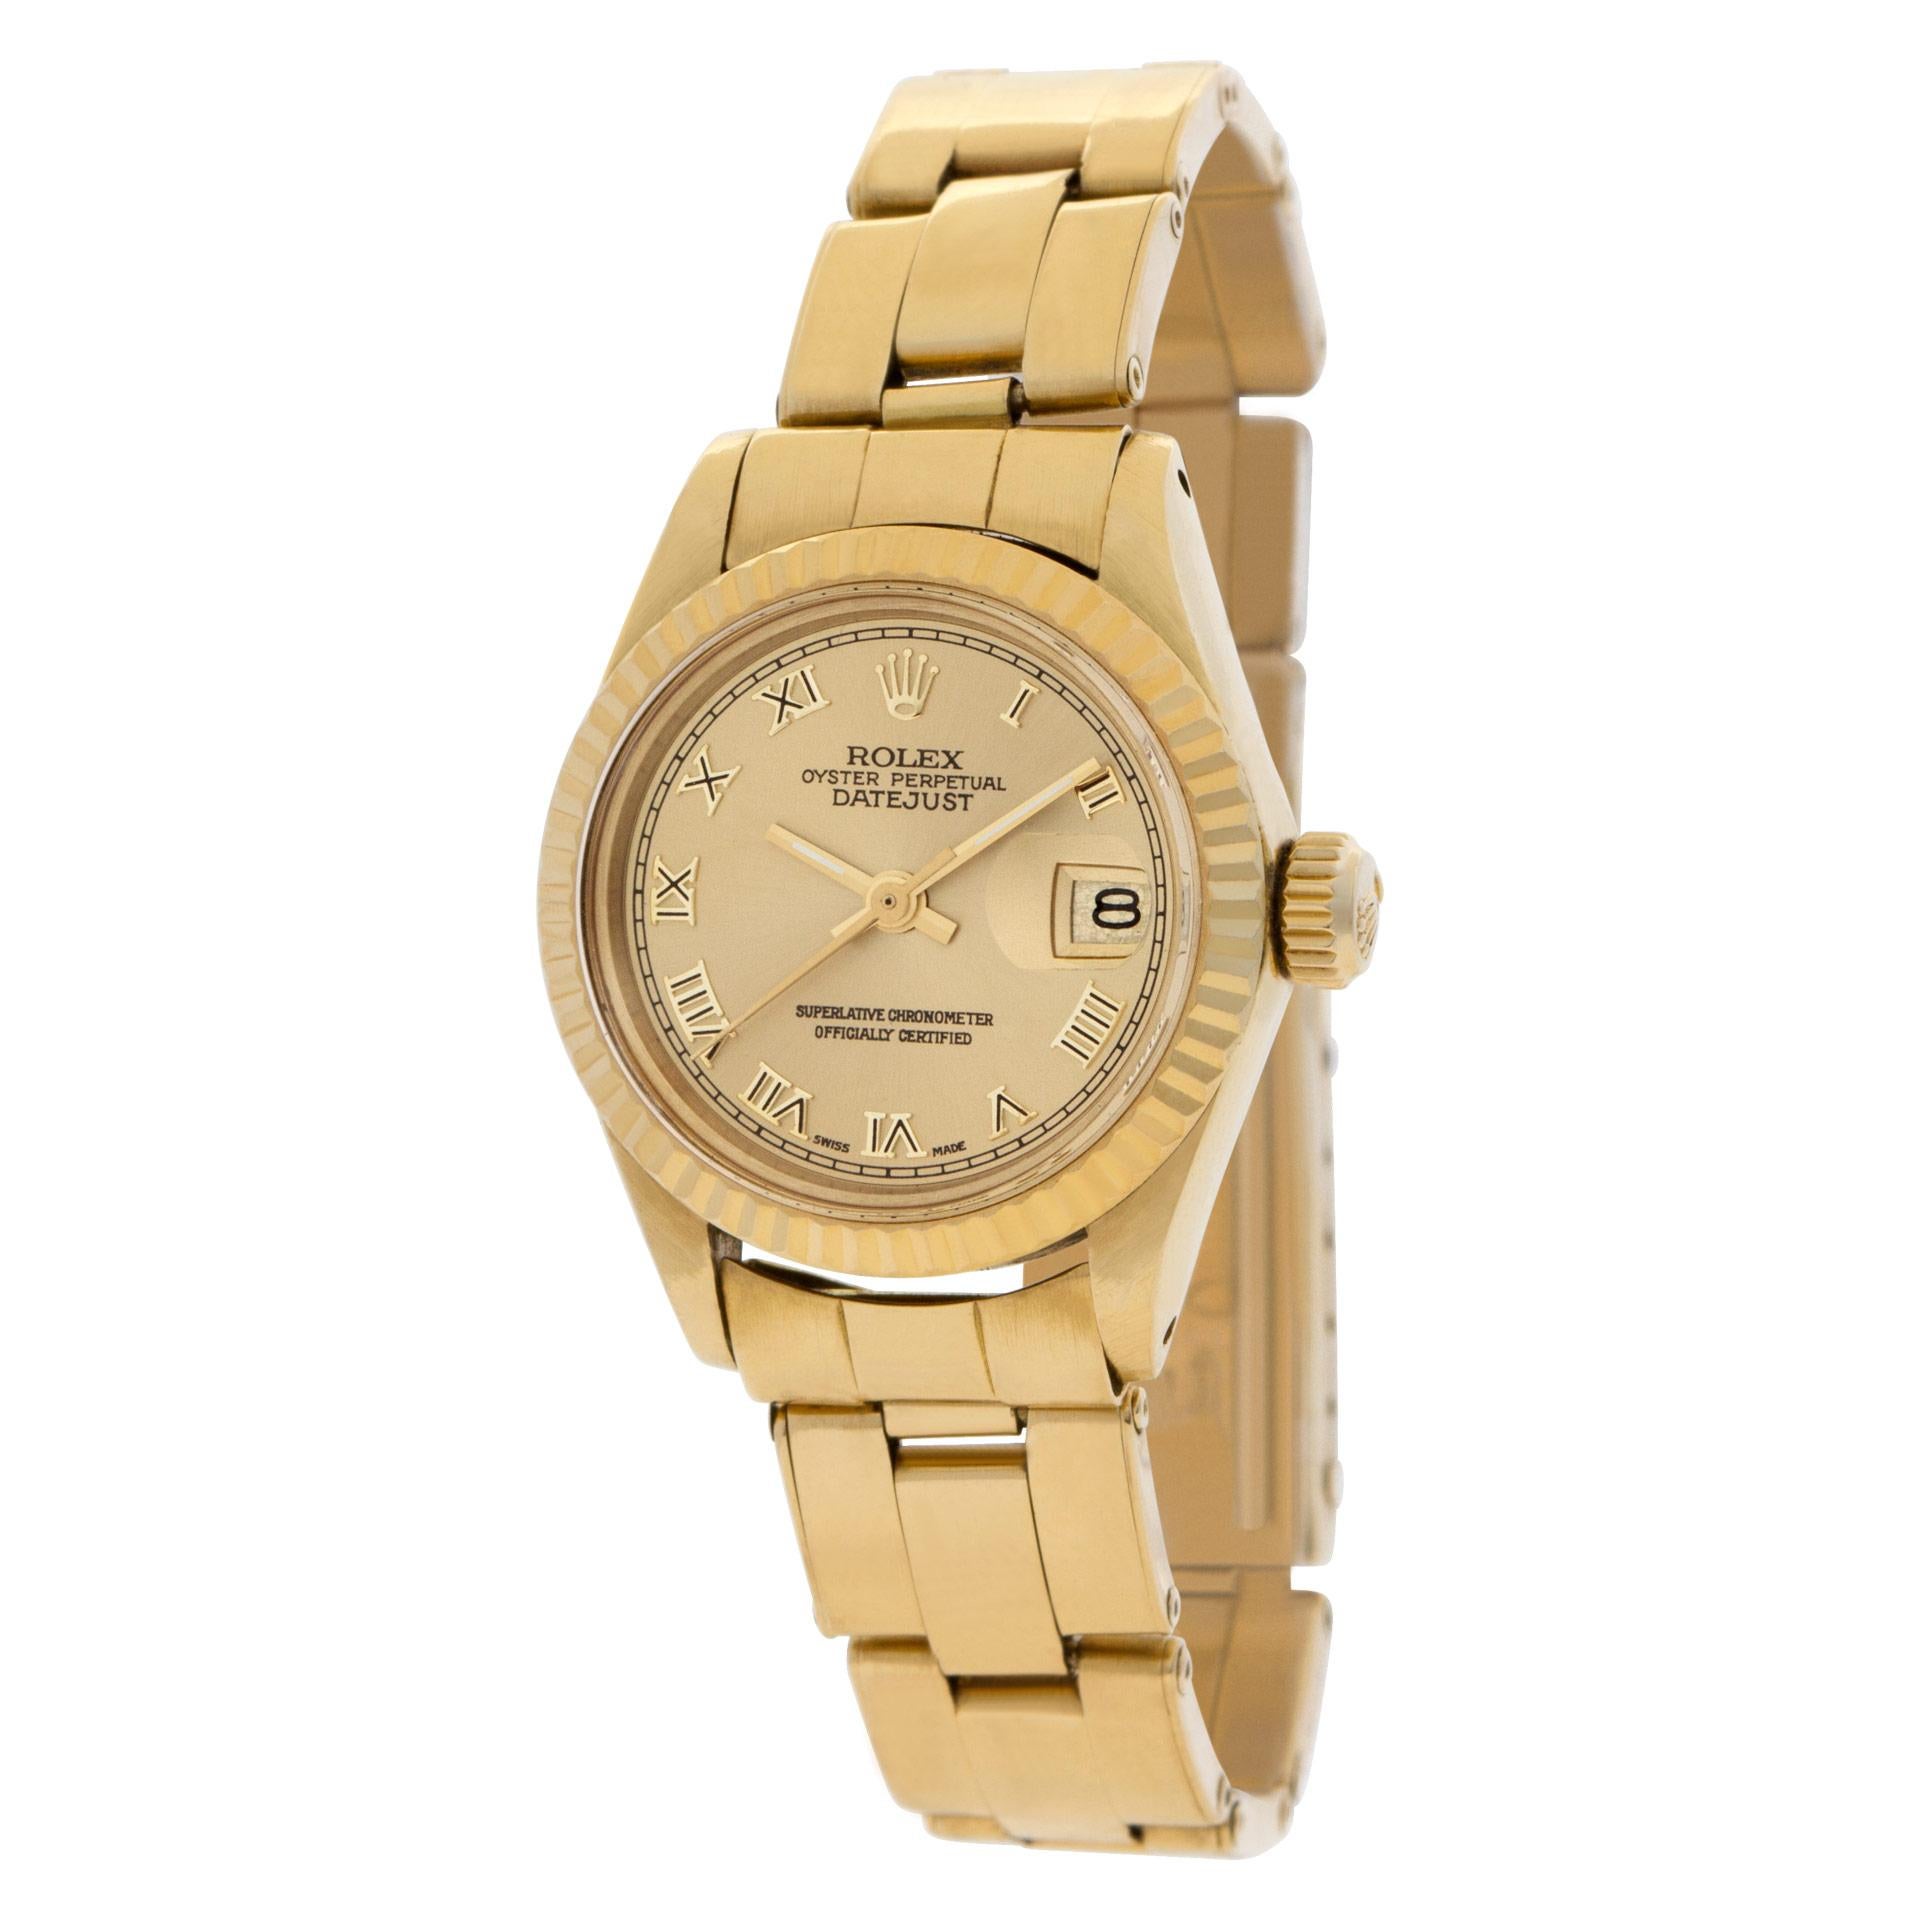 Rolex Datejust in 18k yellow gold with gold dial set with applied Roman numeral hour markers. Auto w/ sweep seconds and date. 26 mm case size. Ref 6917. Circa 1978. **Bank wire only at this price** Fine Pre-owned Rolex Watch.  Certified preowned